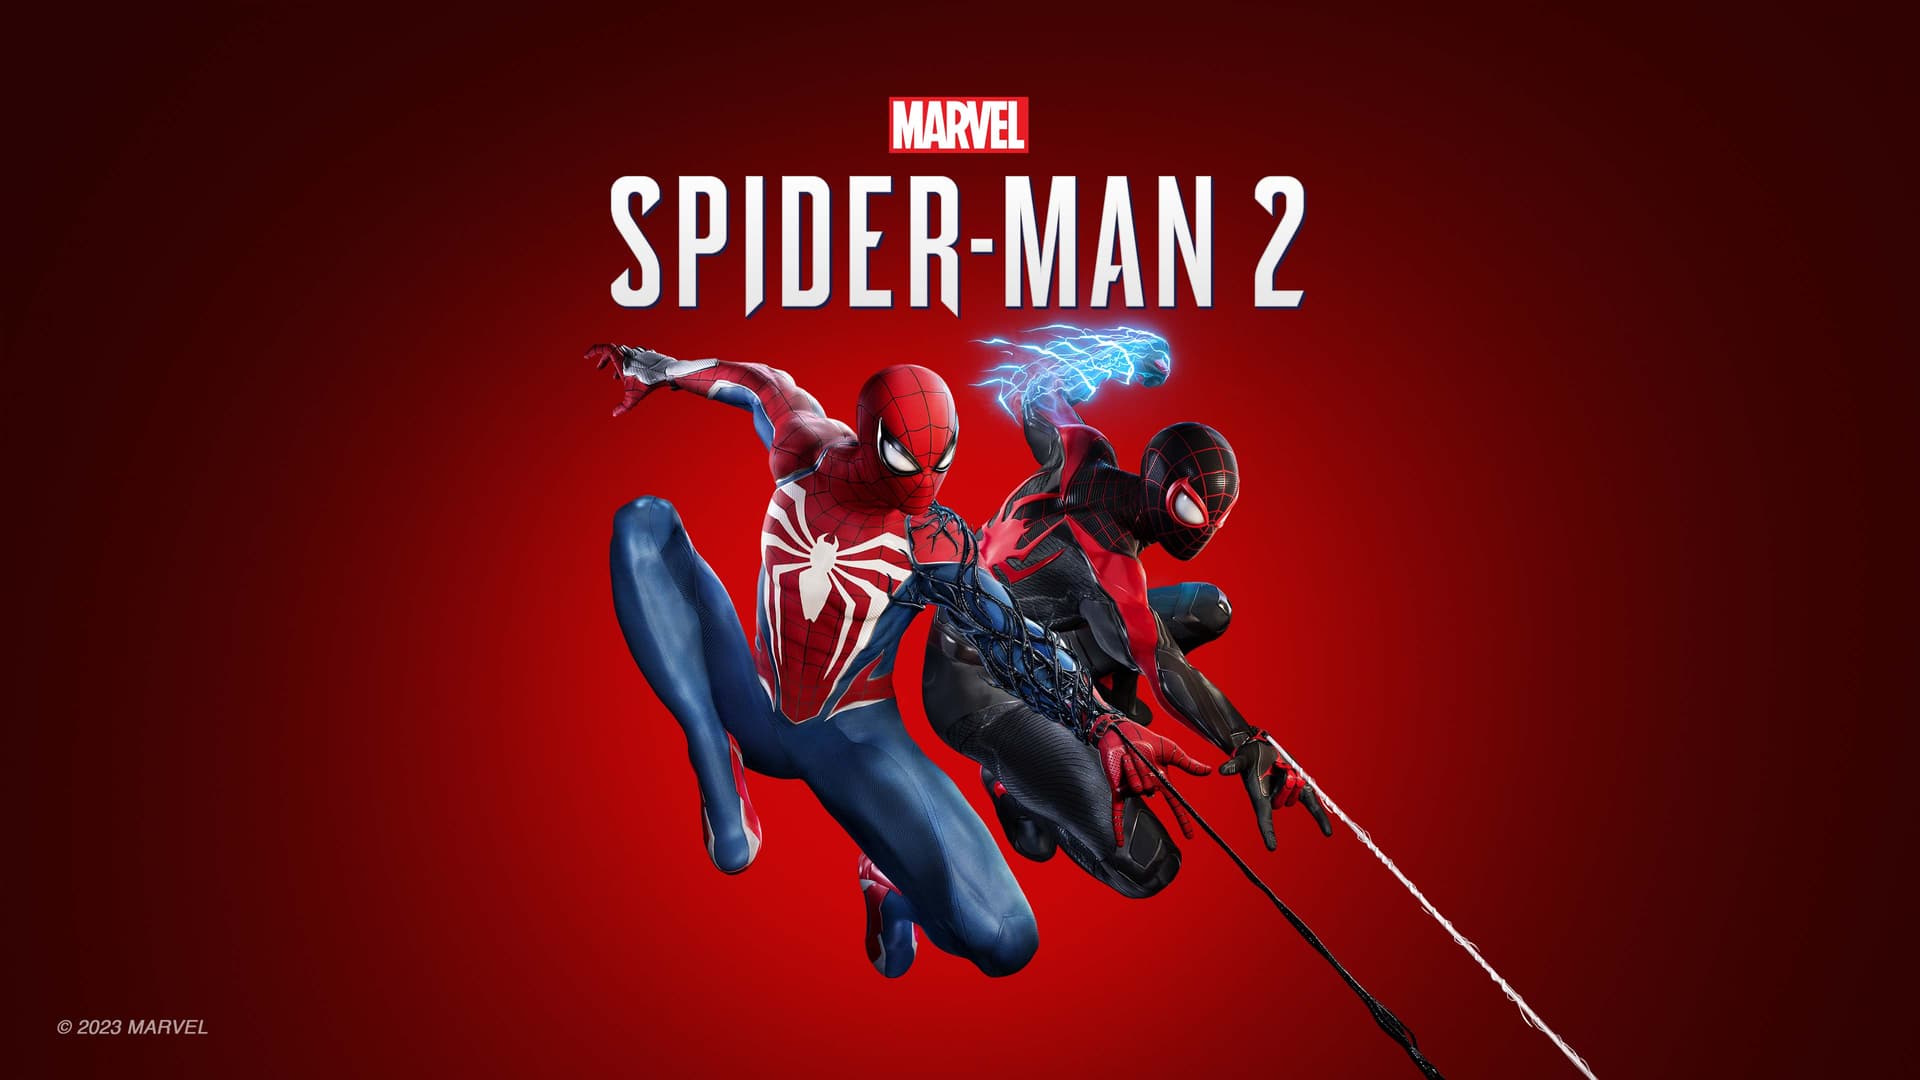 Marvel’s Spider-Man 2 swings onto PlayStation 5 today